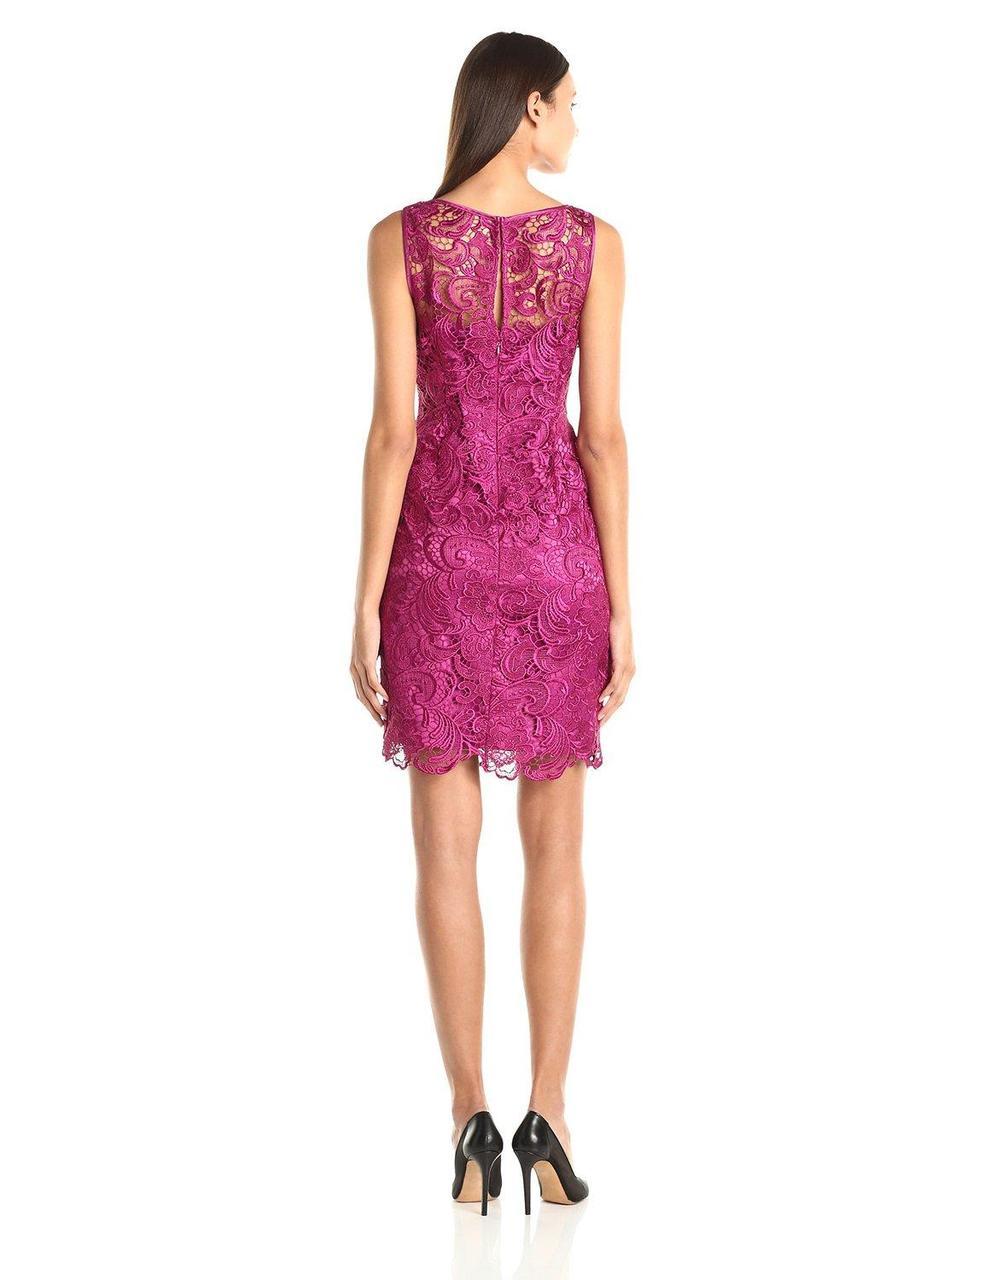 Adrianna Papell - Lace Overlay Dress 41863800 in Pink